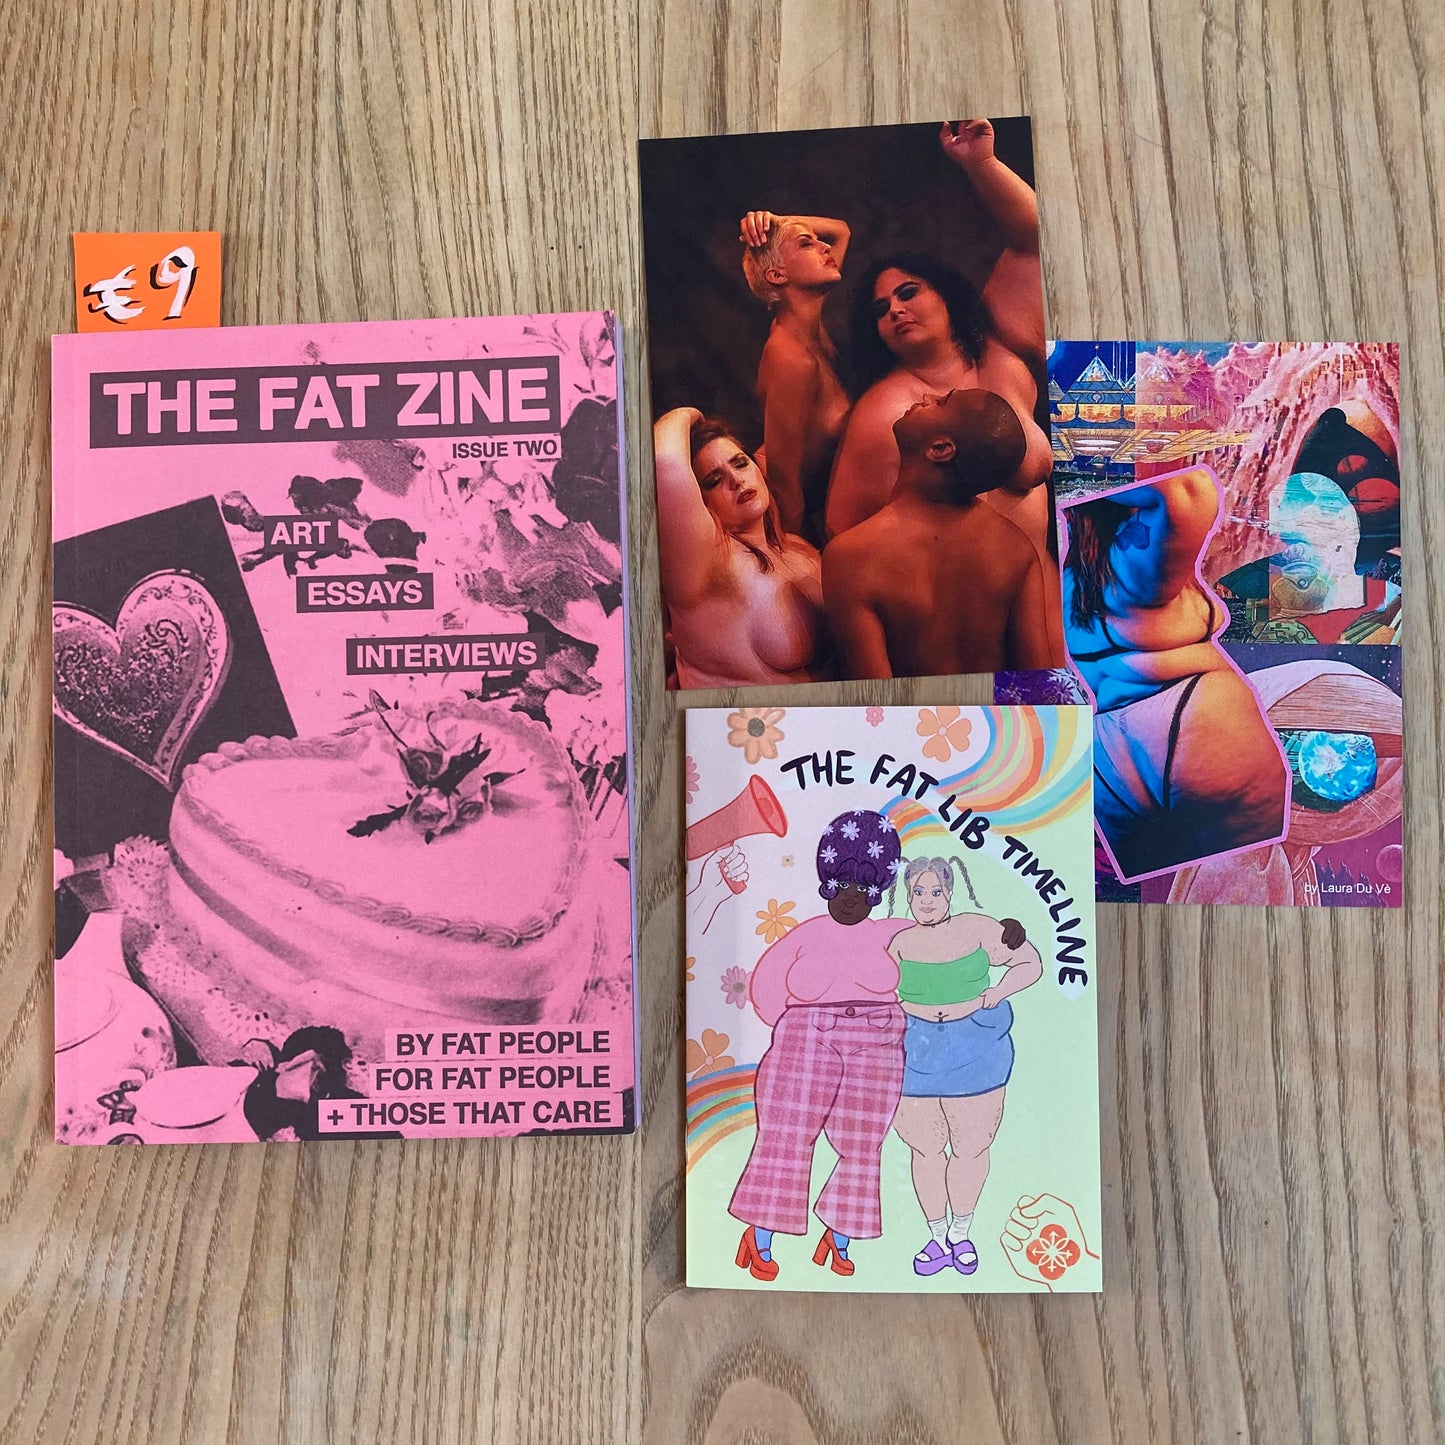 The Fat Zine, Issue 2